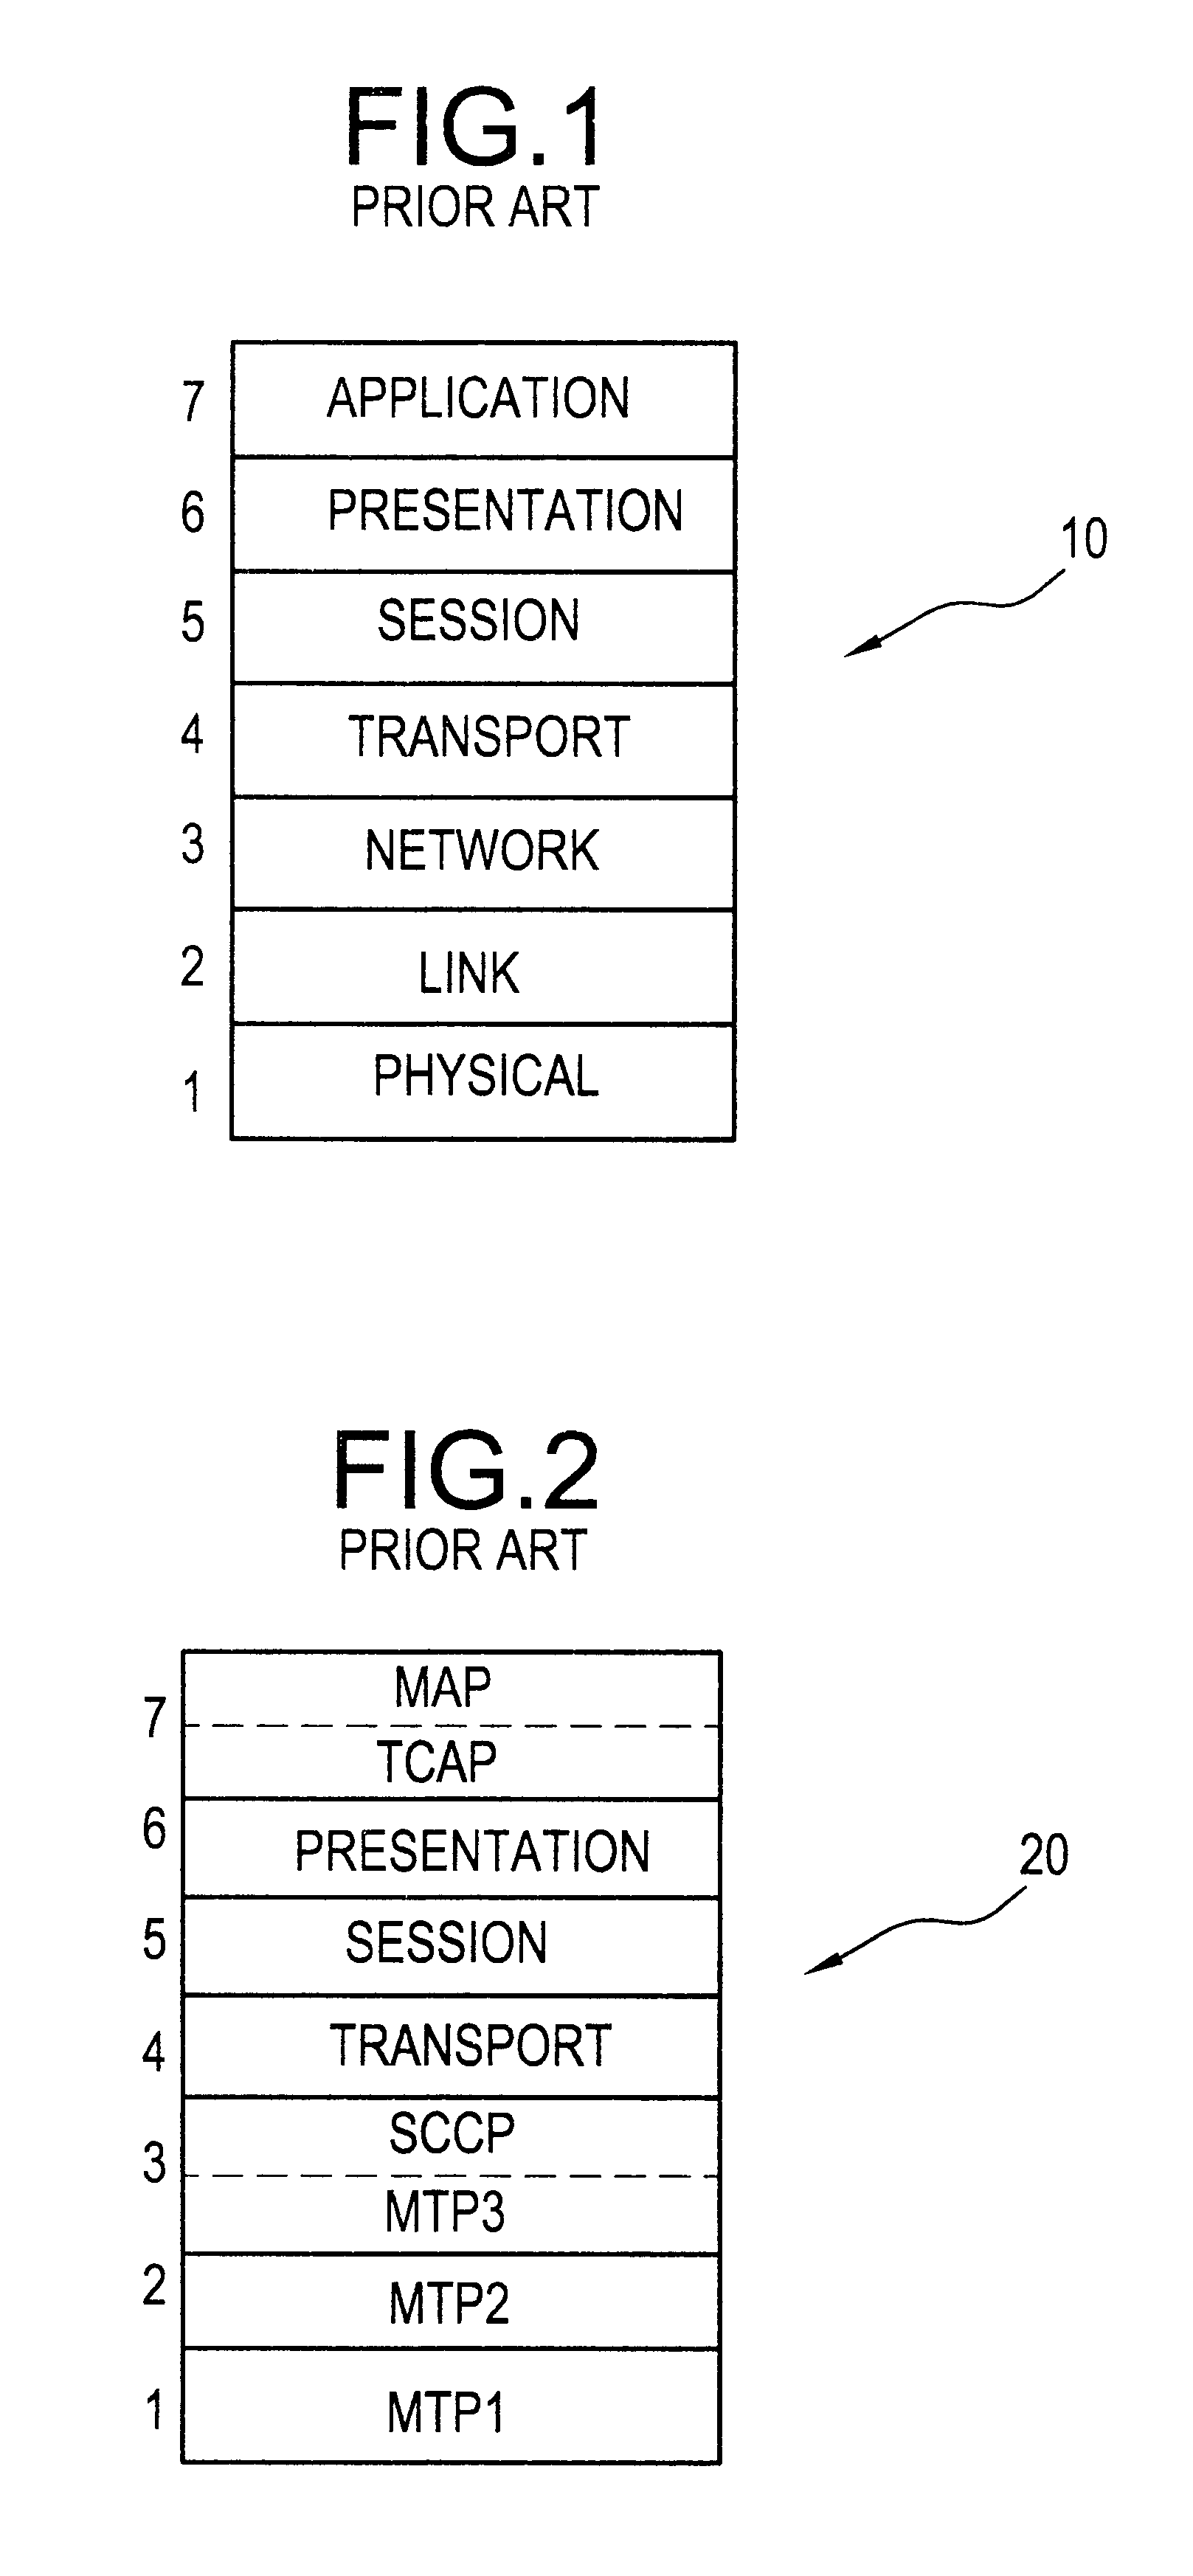 Mapping function and method of transmitting signaling system 7(SS7) telecommunications messages over data networks